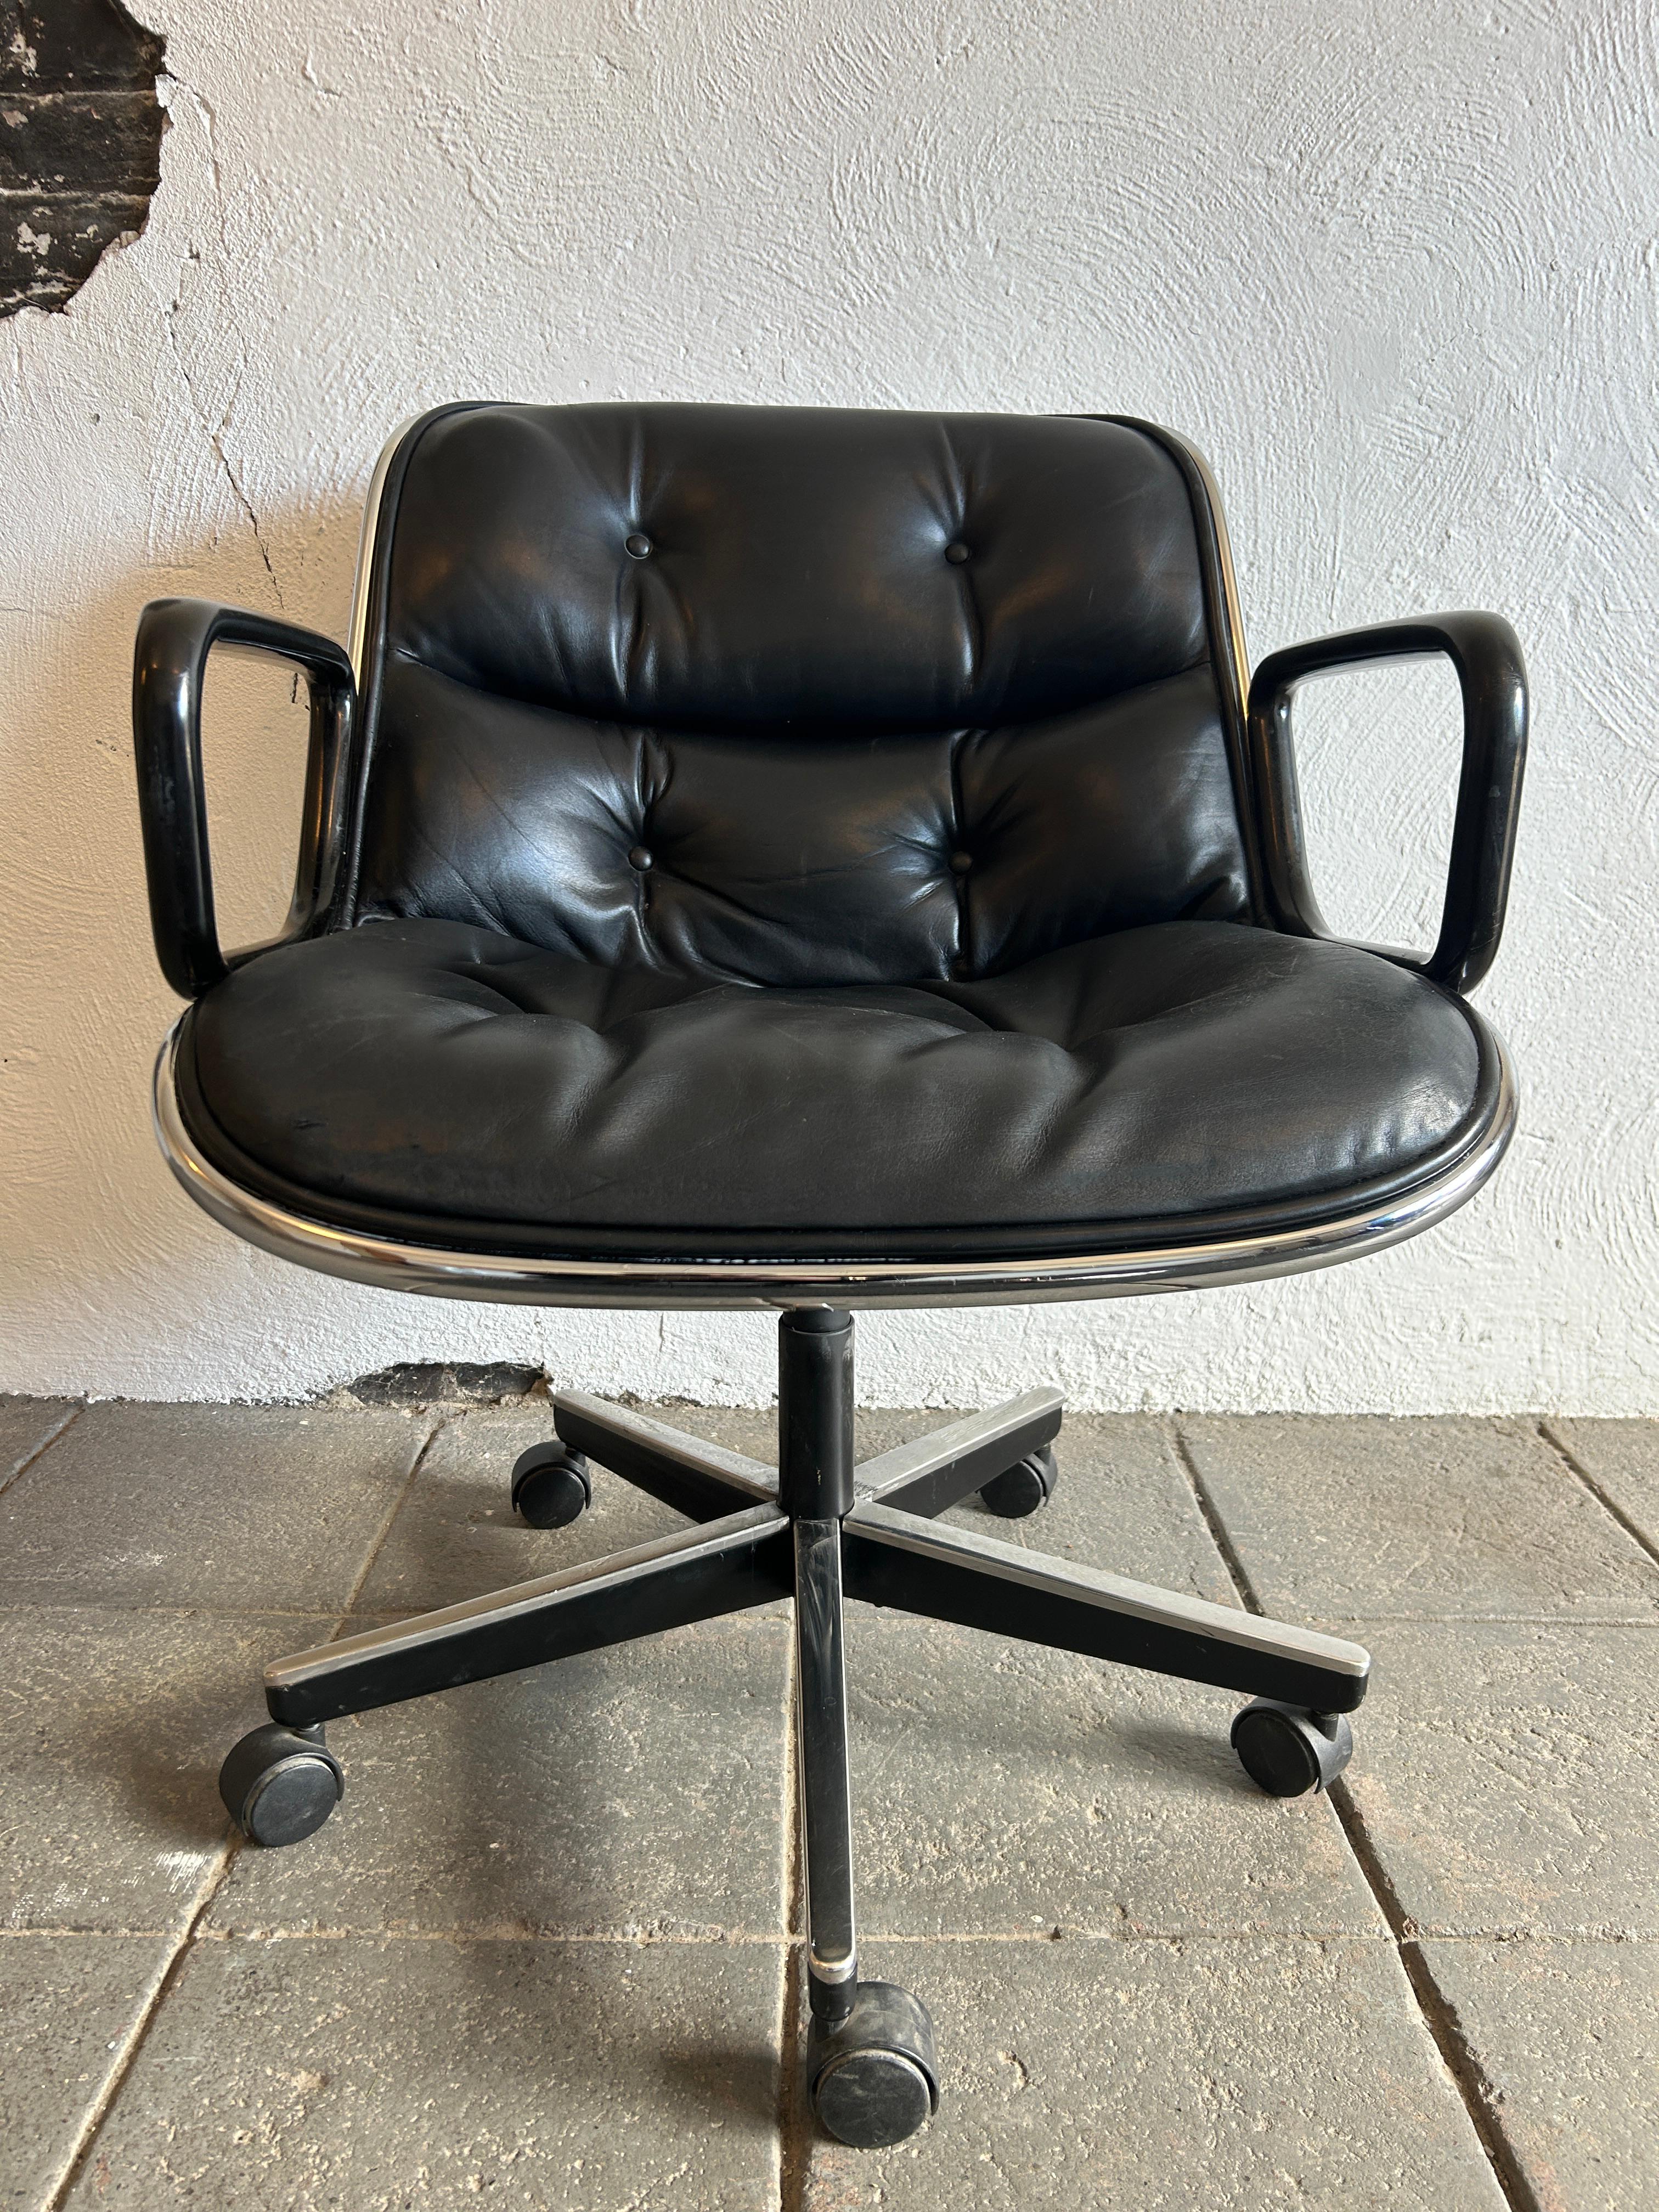 (1) Charles Pollock chair for Knoll featuring a chrome frame with black leather Upholstery. Pollock chairs are icons of Mid-Century Modern design. Pollock revolutionized office seating with the introduction of this chair in the 1960s. The chair has